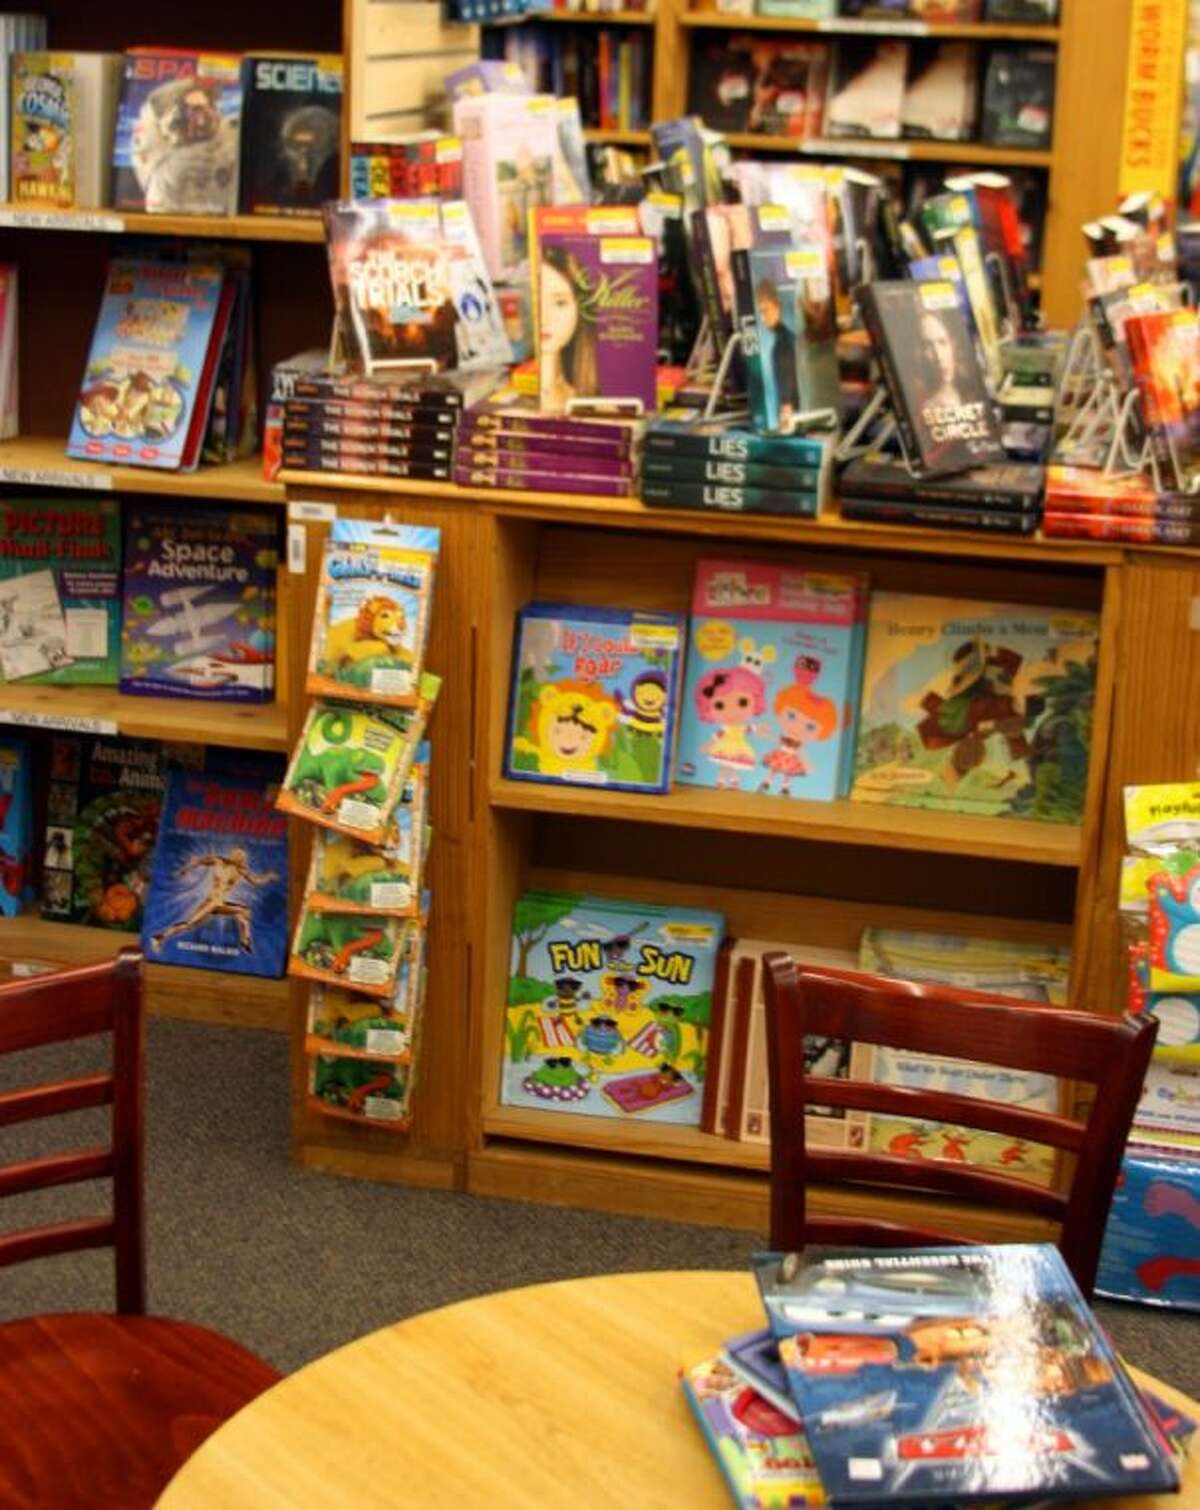 Looking for something fun and education for your child this summer? Half Price Books is sponsoring a free Feed Your Brain Summer Reading Program that offers kids a chance to win monthly prizes.